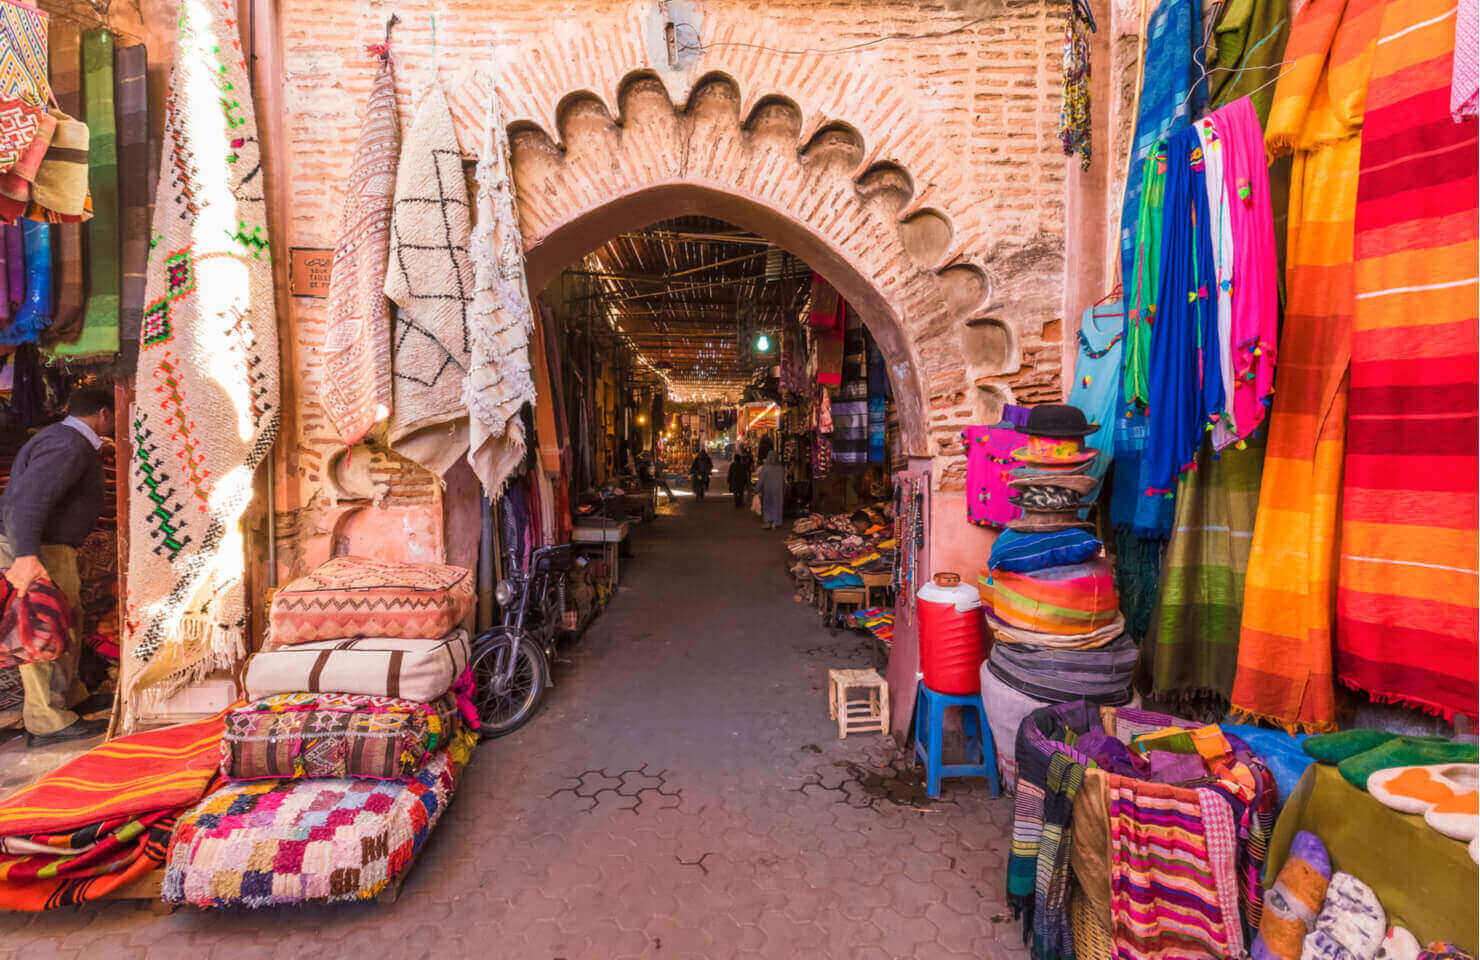 View on a part of the Souk market in Marrakech